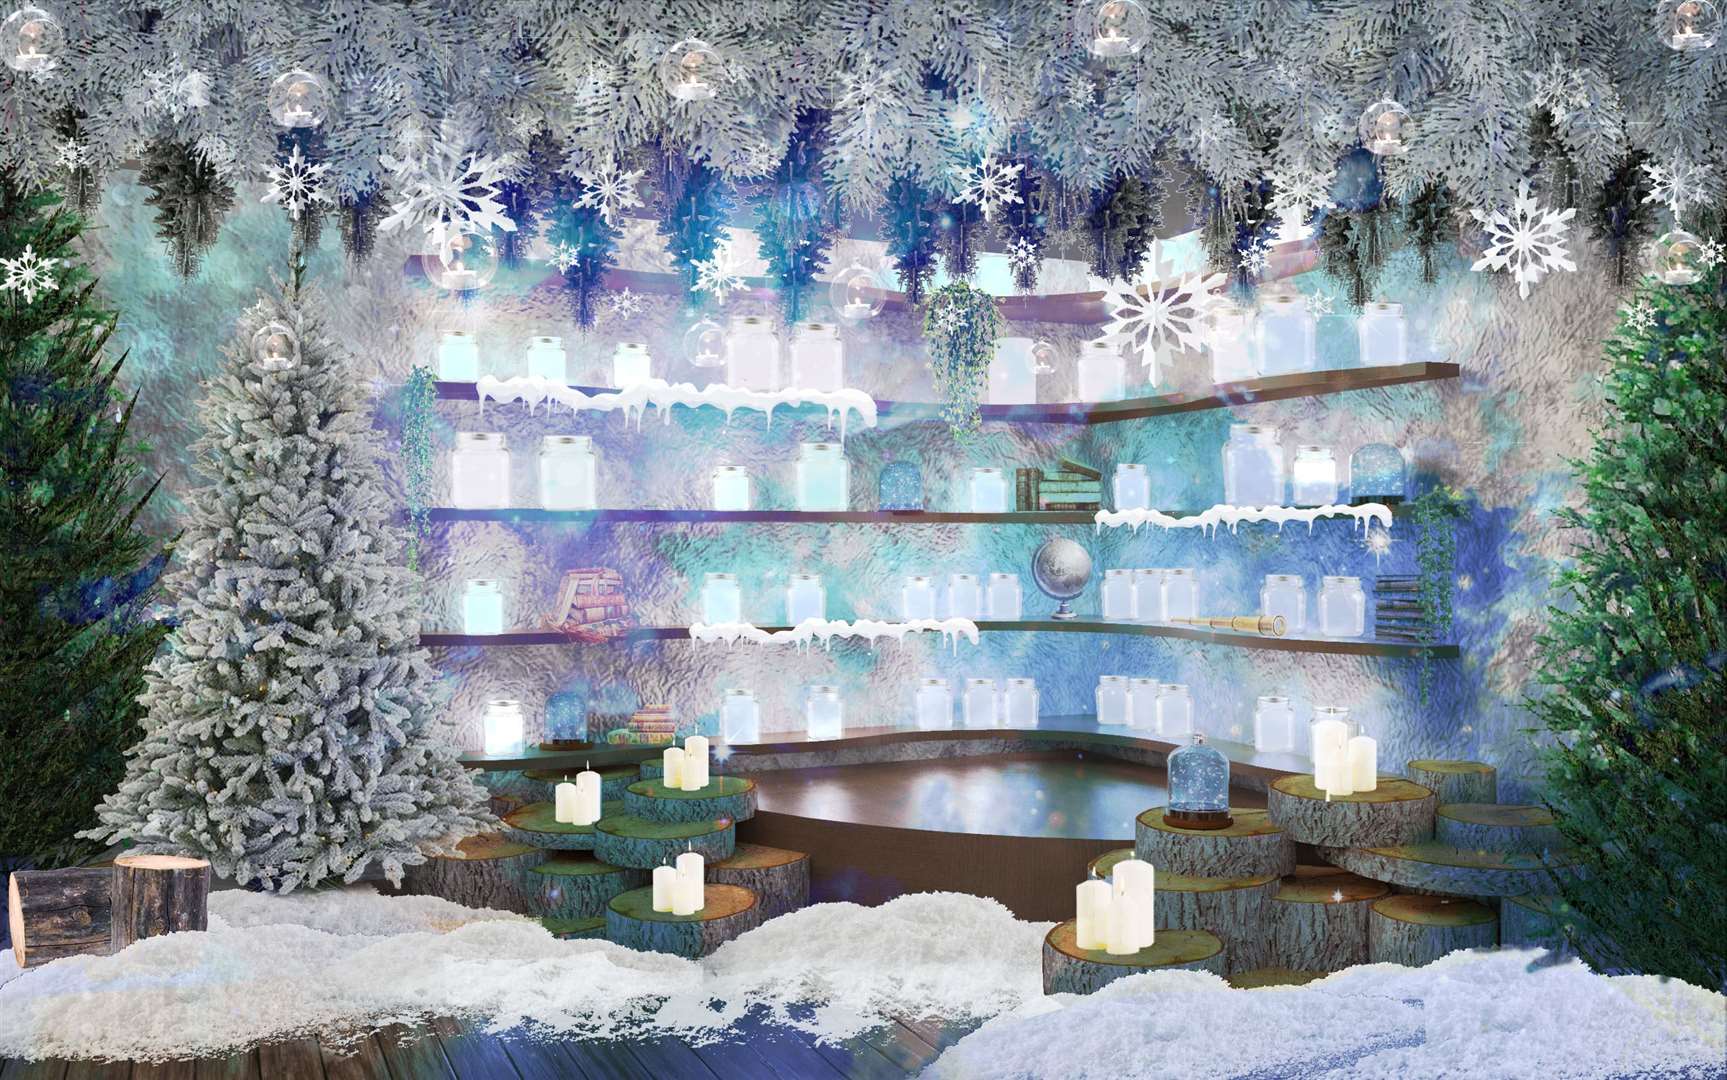 A new 'immersive' experience is promised this year for visitors instead of a traditional grotto